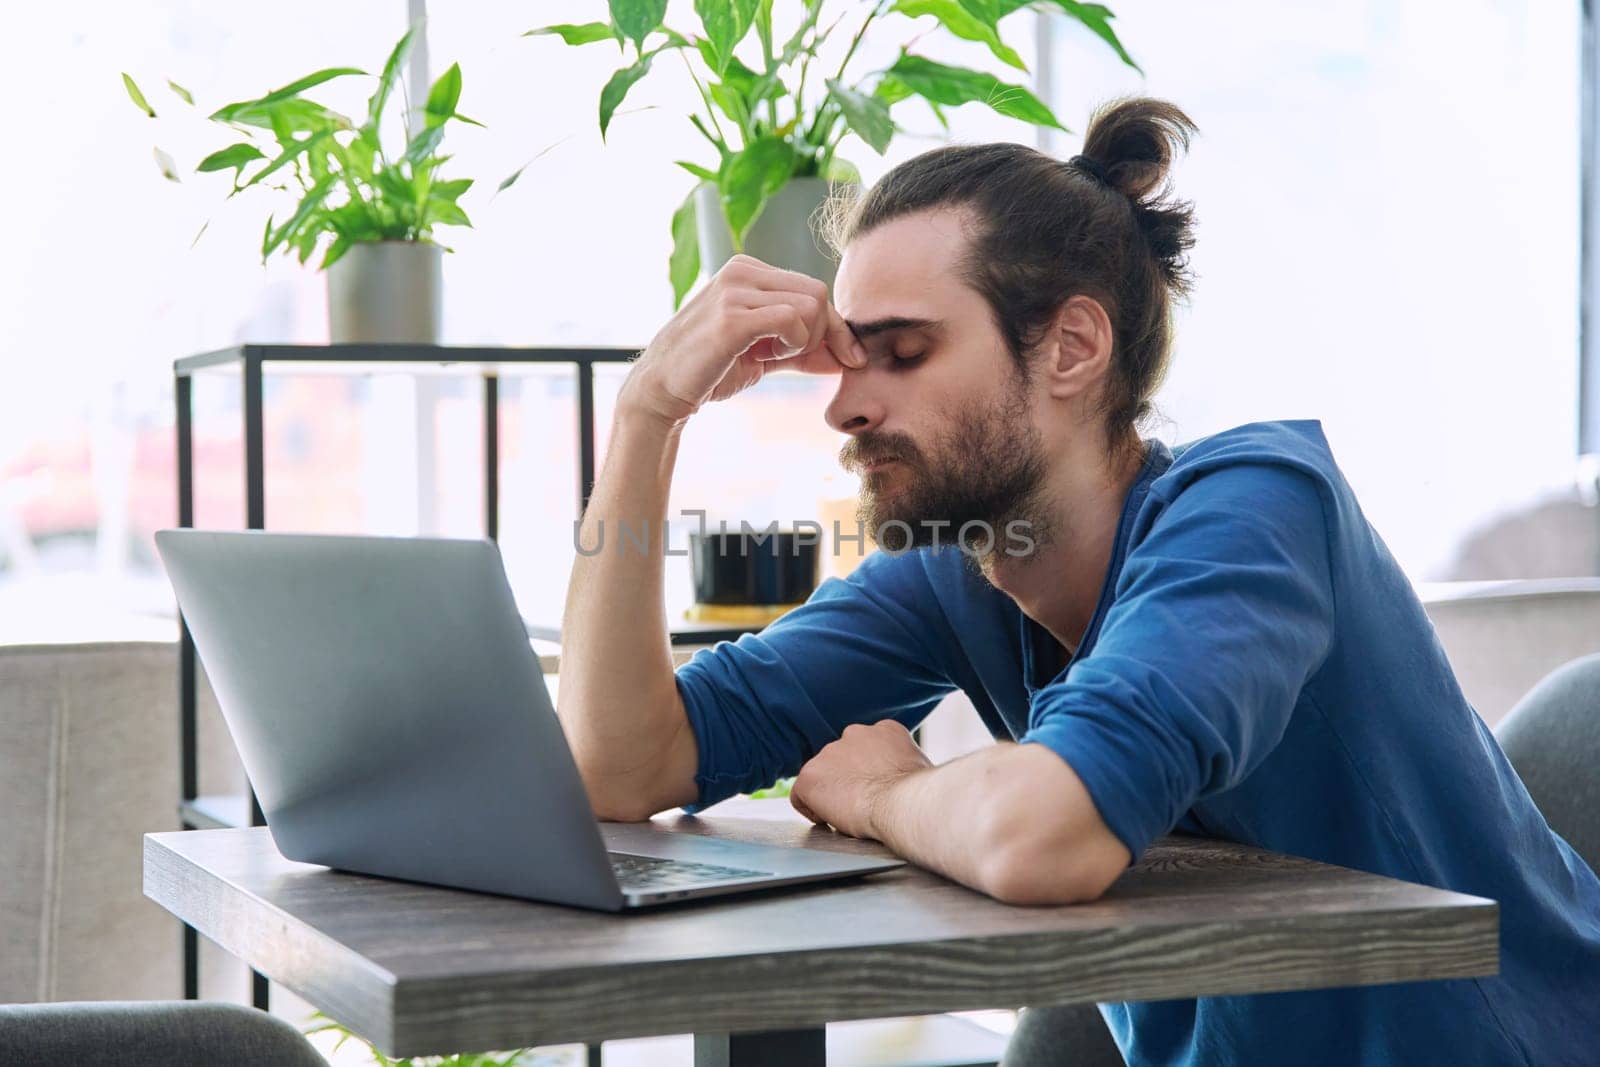 Young tired man working with laptop computer having headache migraine fatigue, holding hands on face. Depression, stress, problems, difficulties with business work, mental health